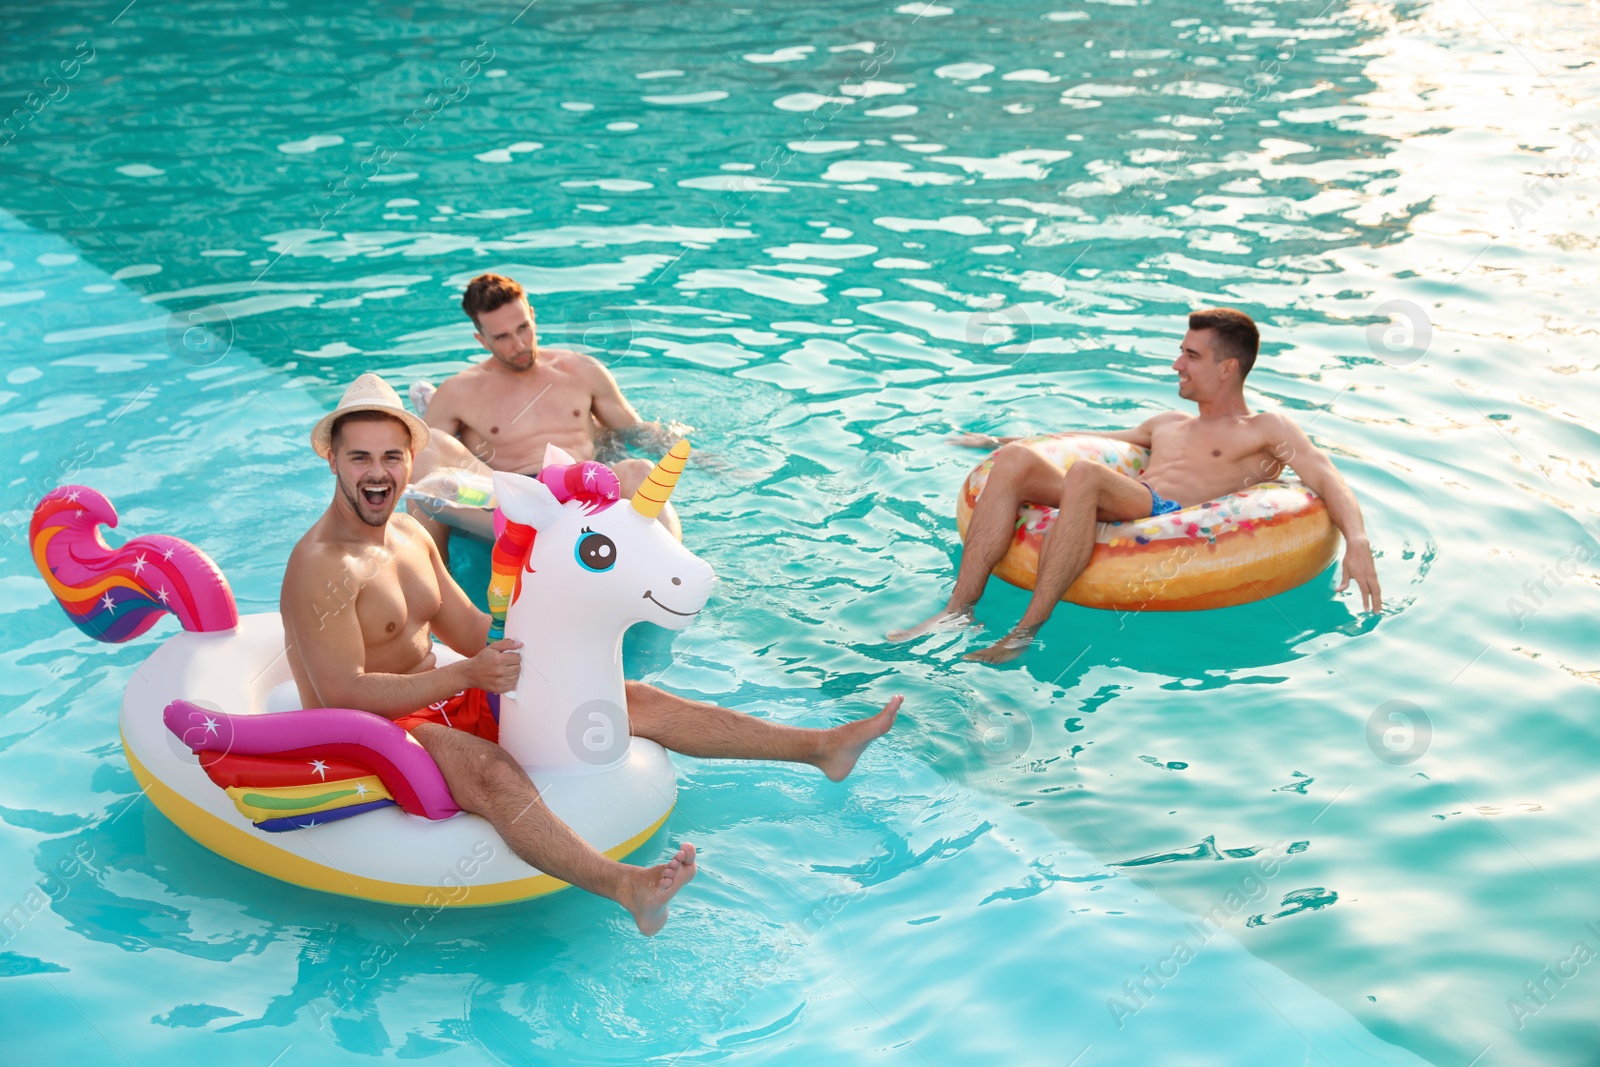 Photo of Happy young friends relaxing in swimming pool